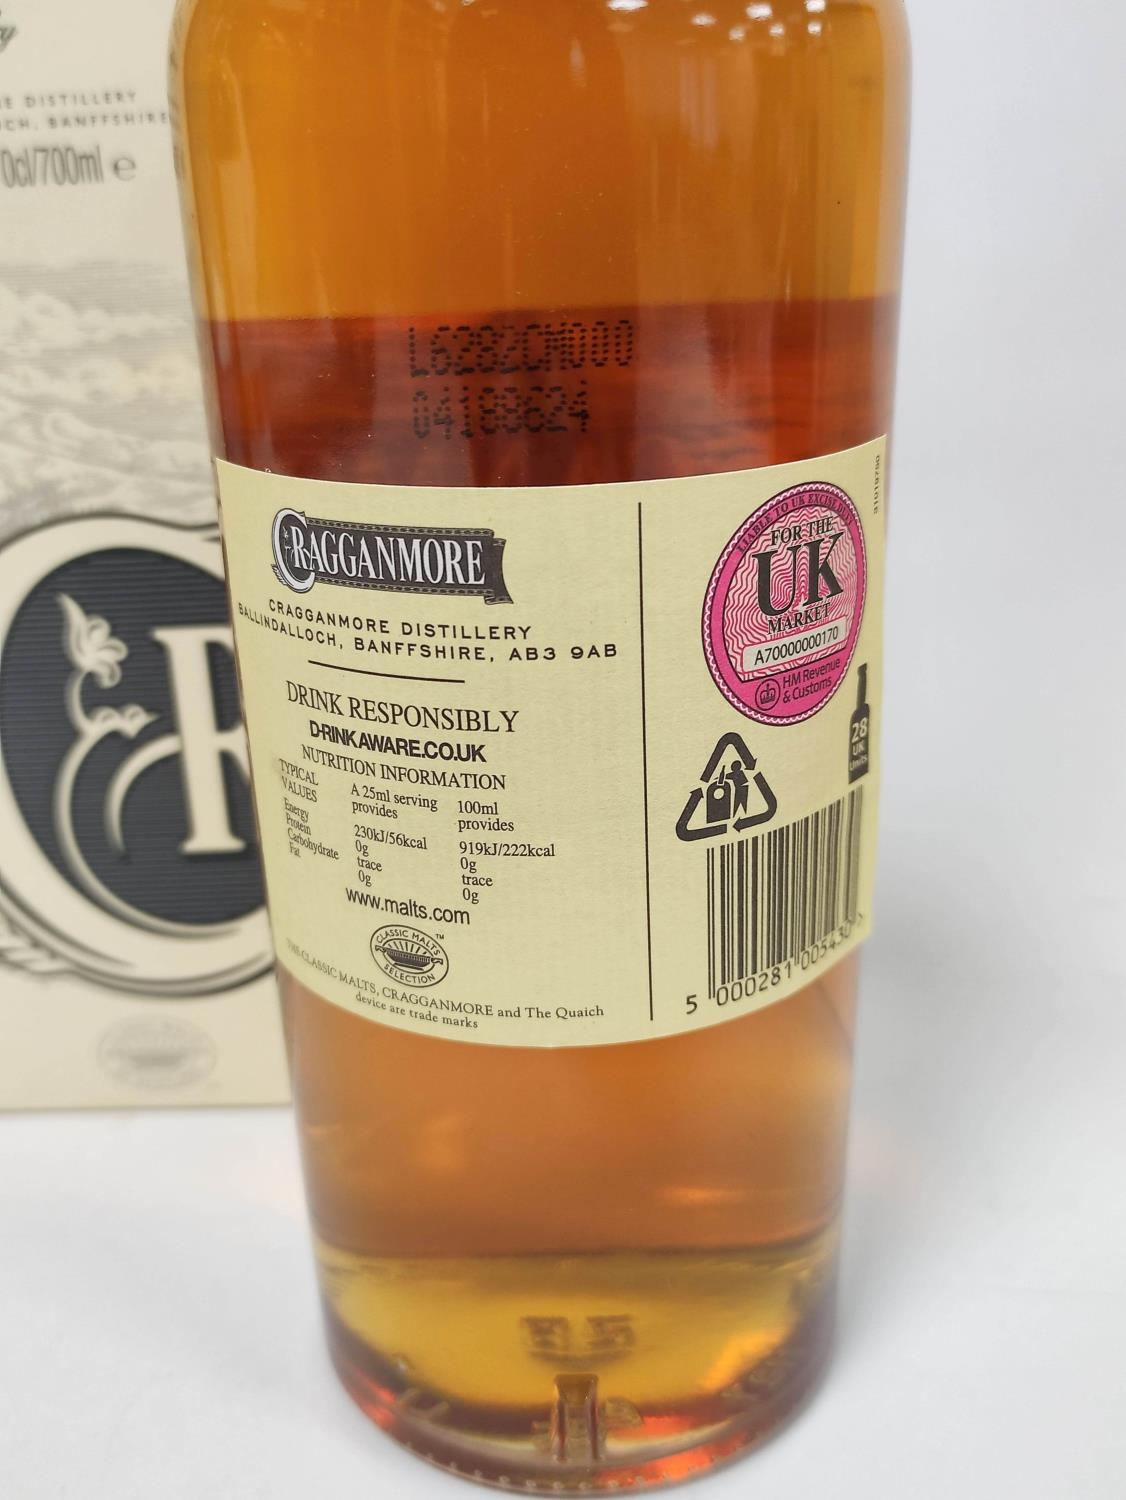 Glen Keith Distillery Edition single malt Scotch whisky, 70cl, 40% vol, boxed, with Cragganmore 12 - Image 4 of 7